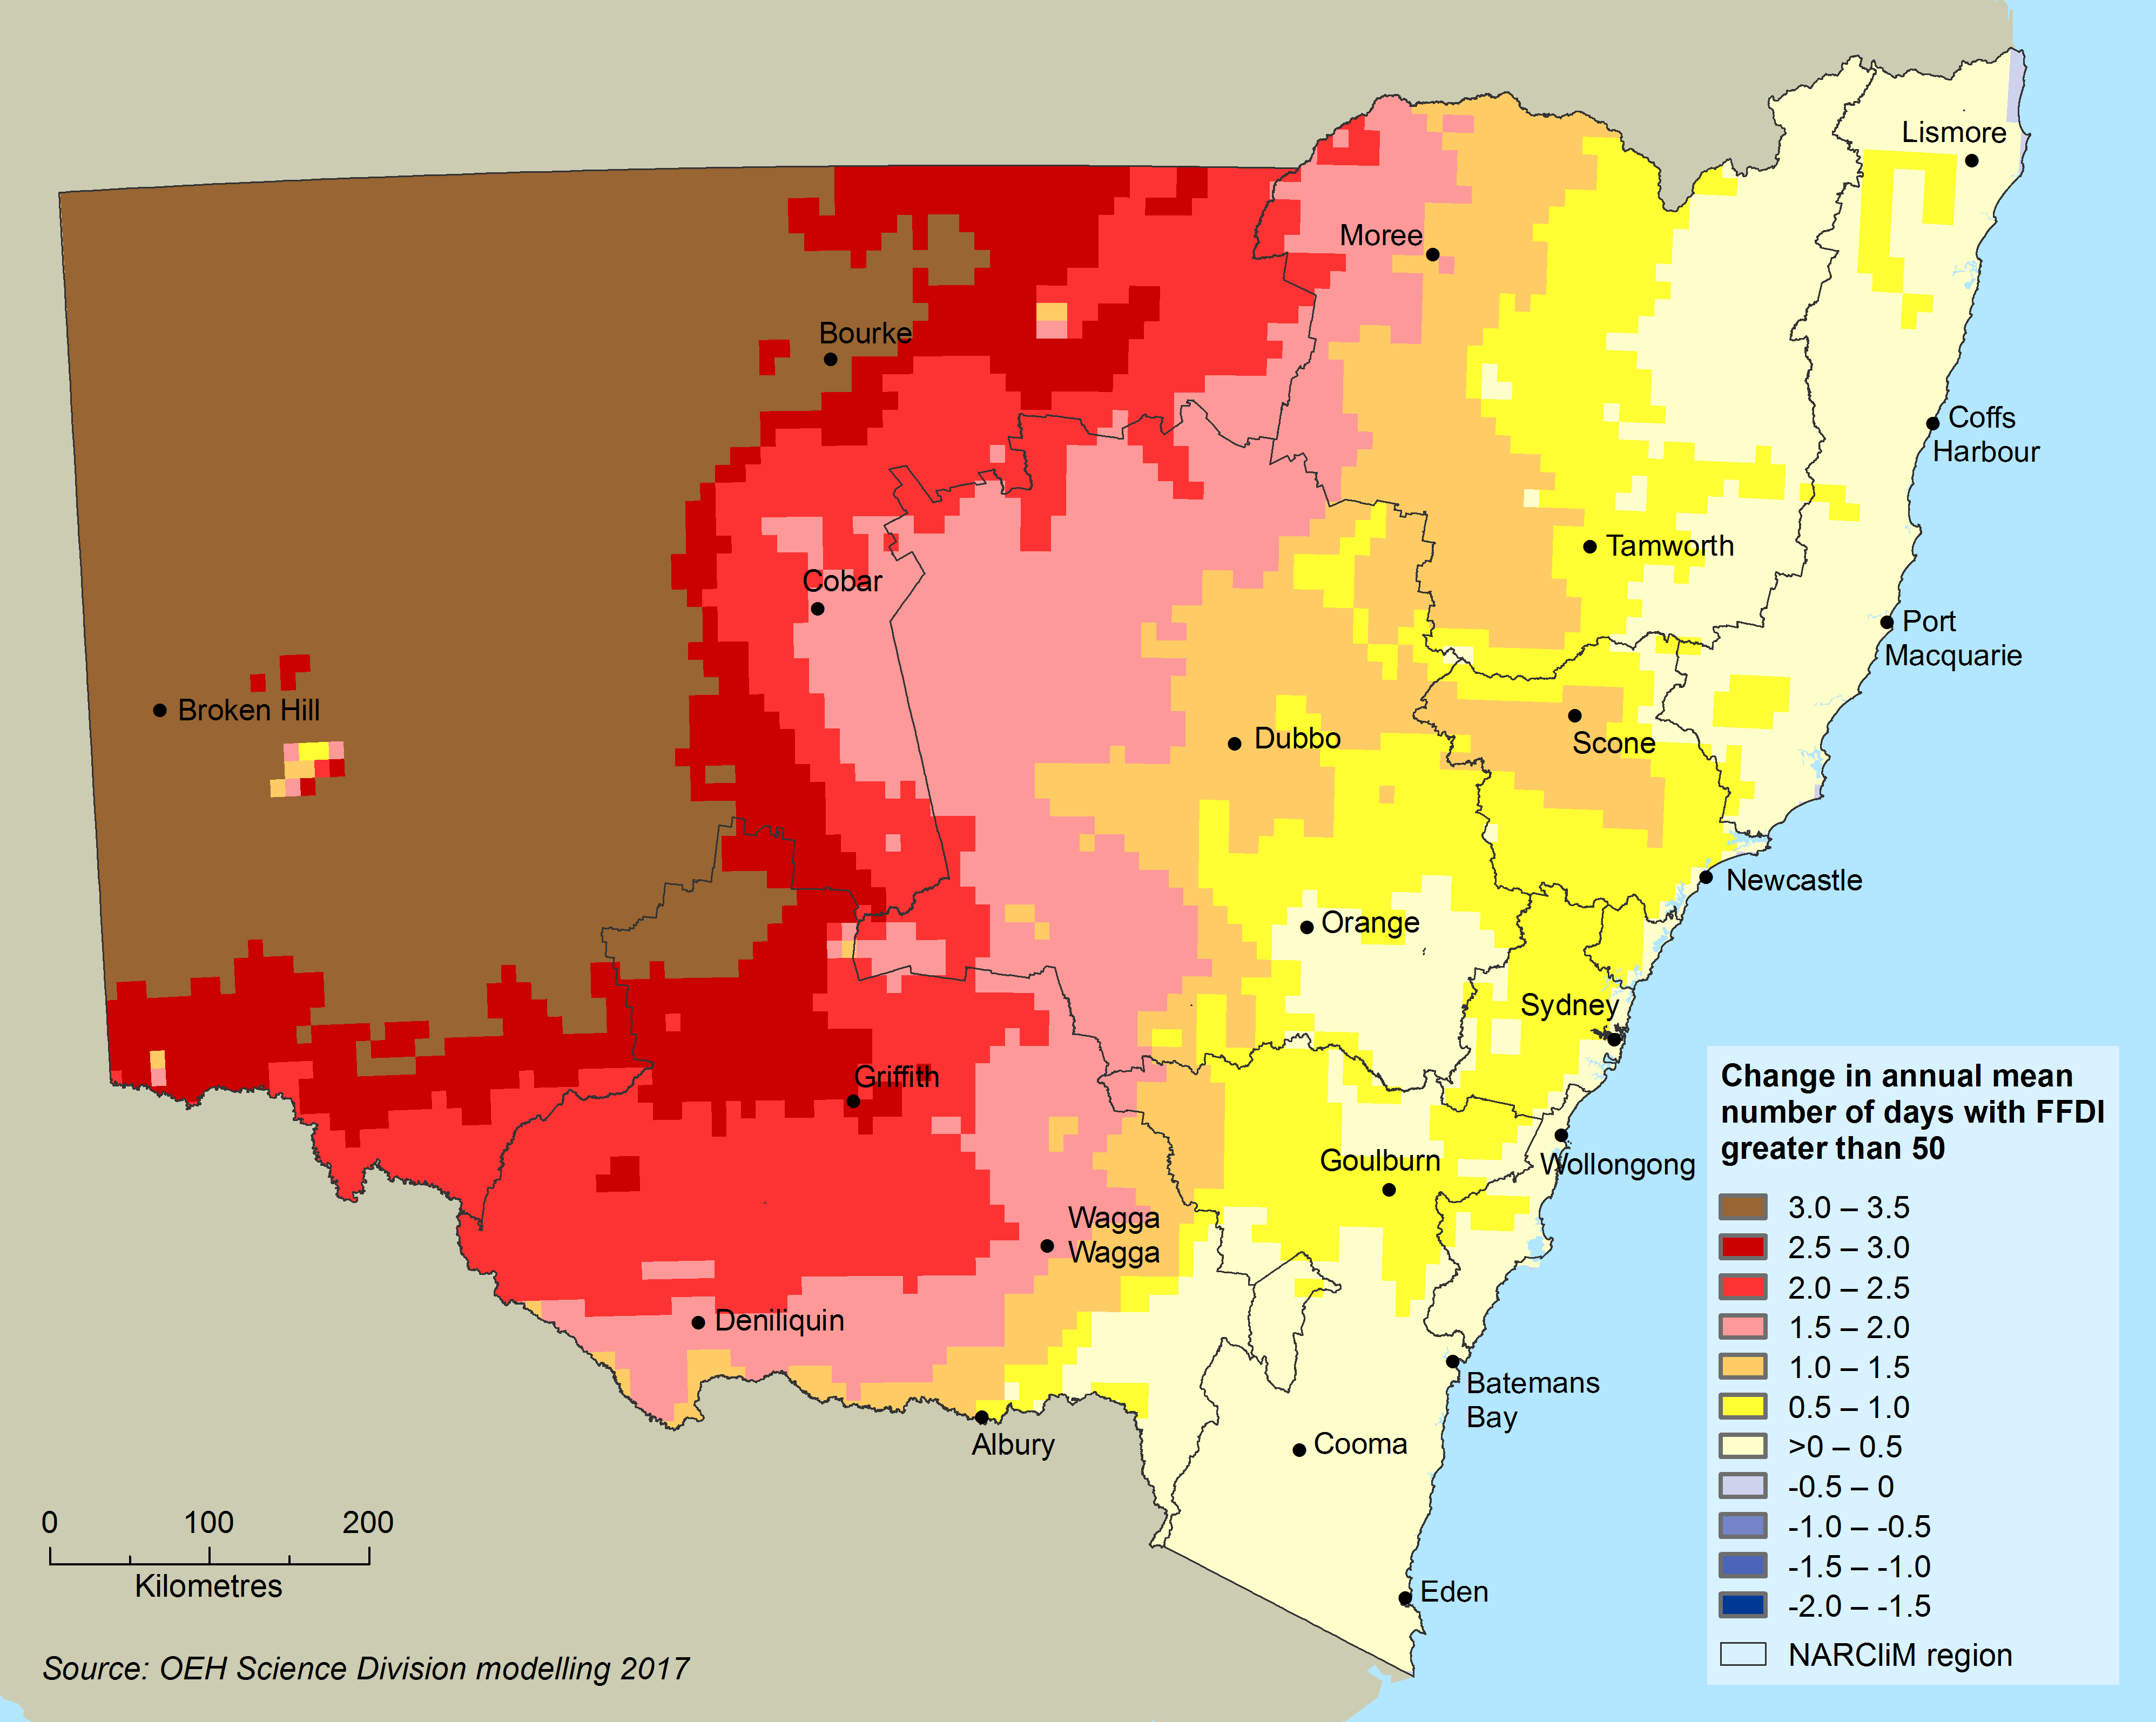 Map showing the change in sever fire weather days across NSW, with the highest areas (brown) across the west of the state - grading from red to yellow (lower increases) from the west to the east (coast) of NSW